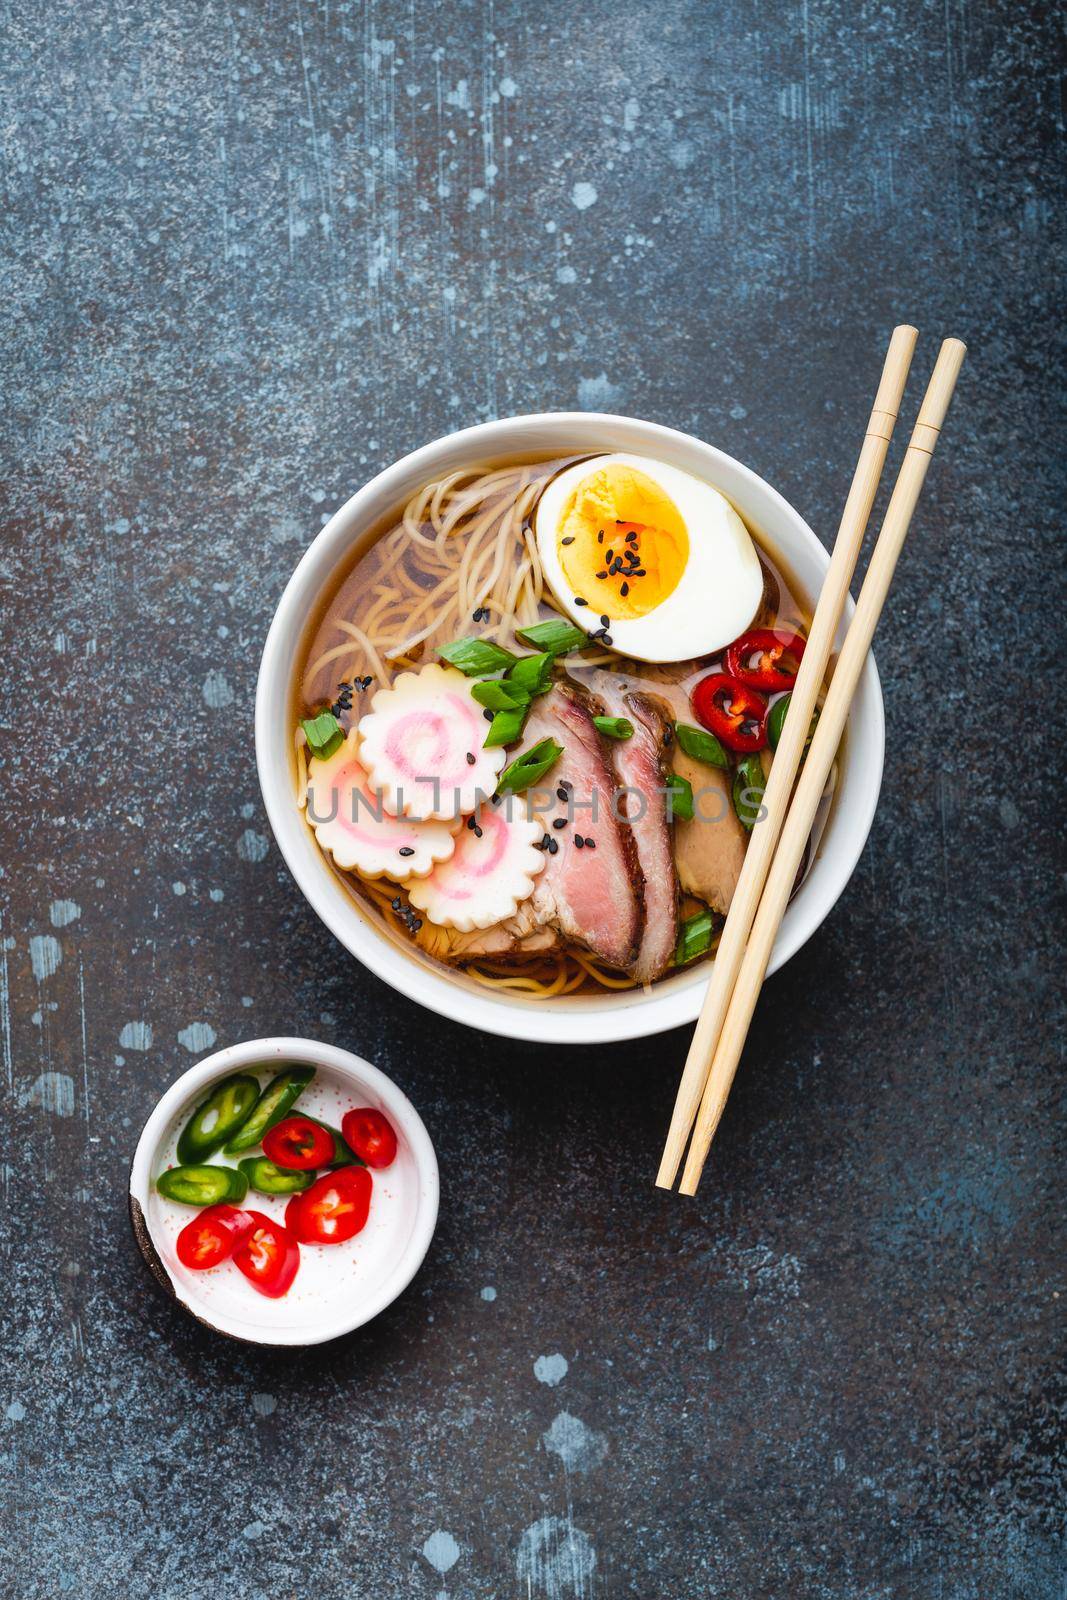 Tasty Japanese noodle soup ramen in white ceramic bowl with meat broth, sliced pork, narutomaki, egg with yolk on rustic stone background. Traditional dish of Japan, top view, close-up, concept